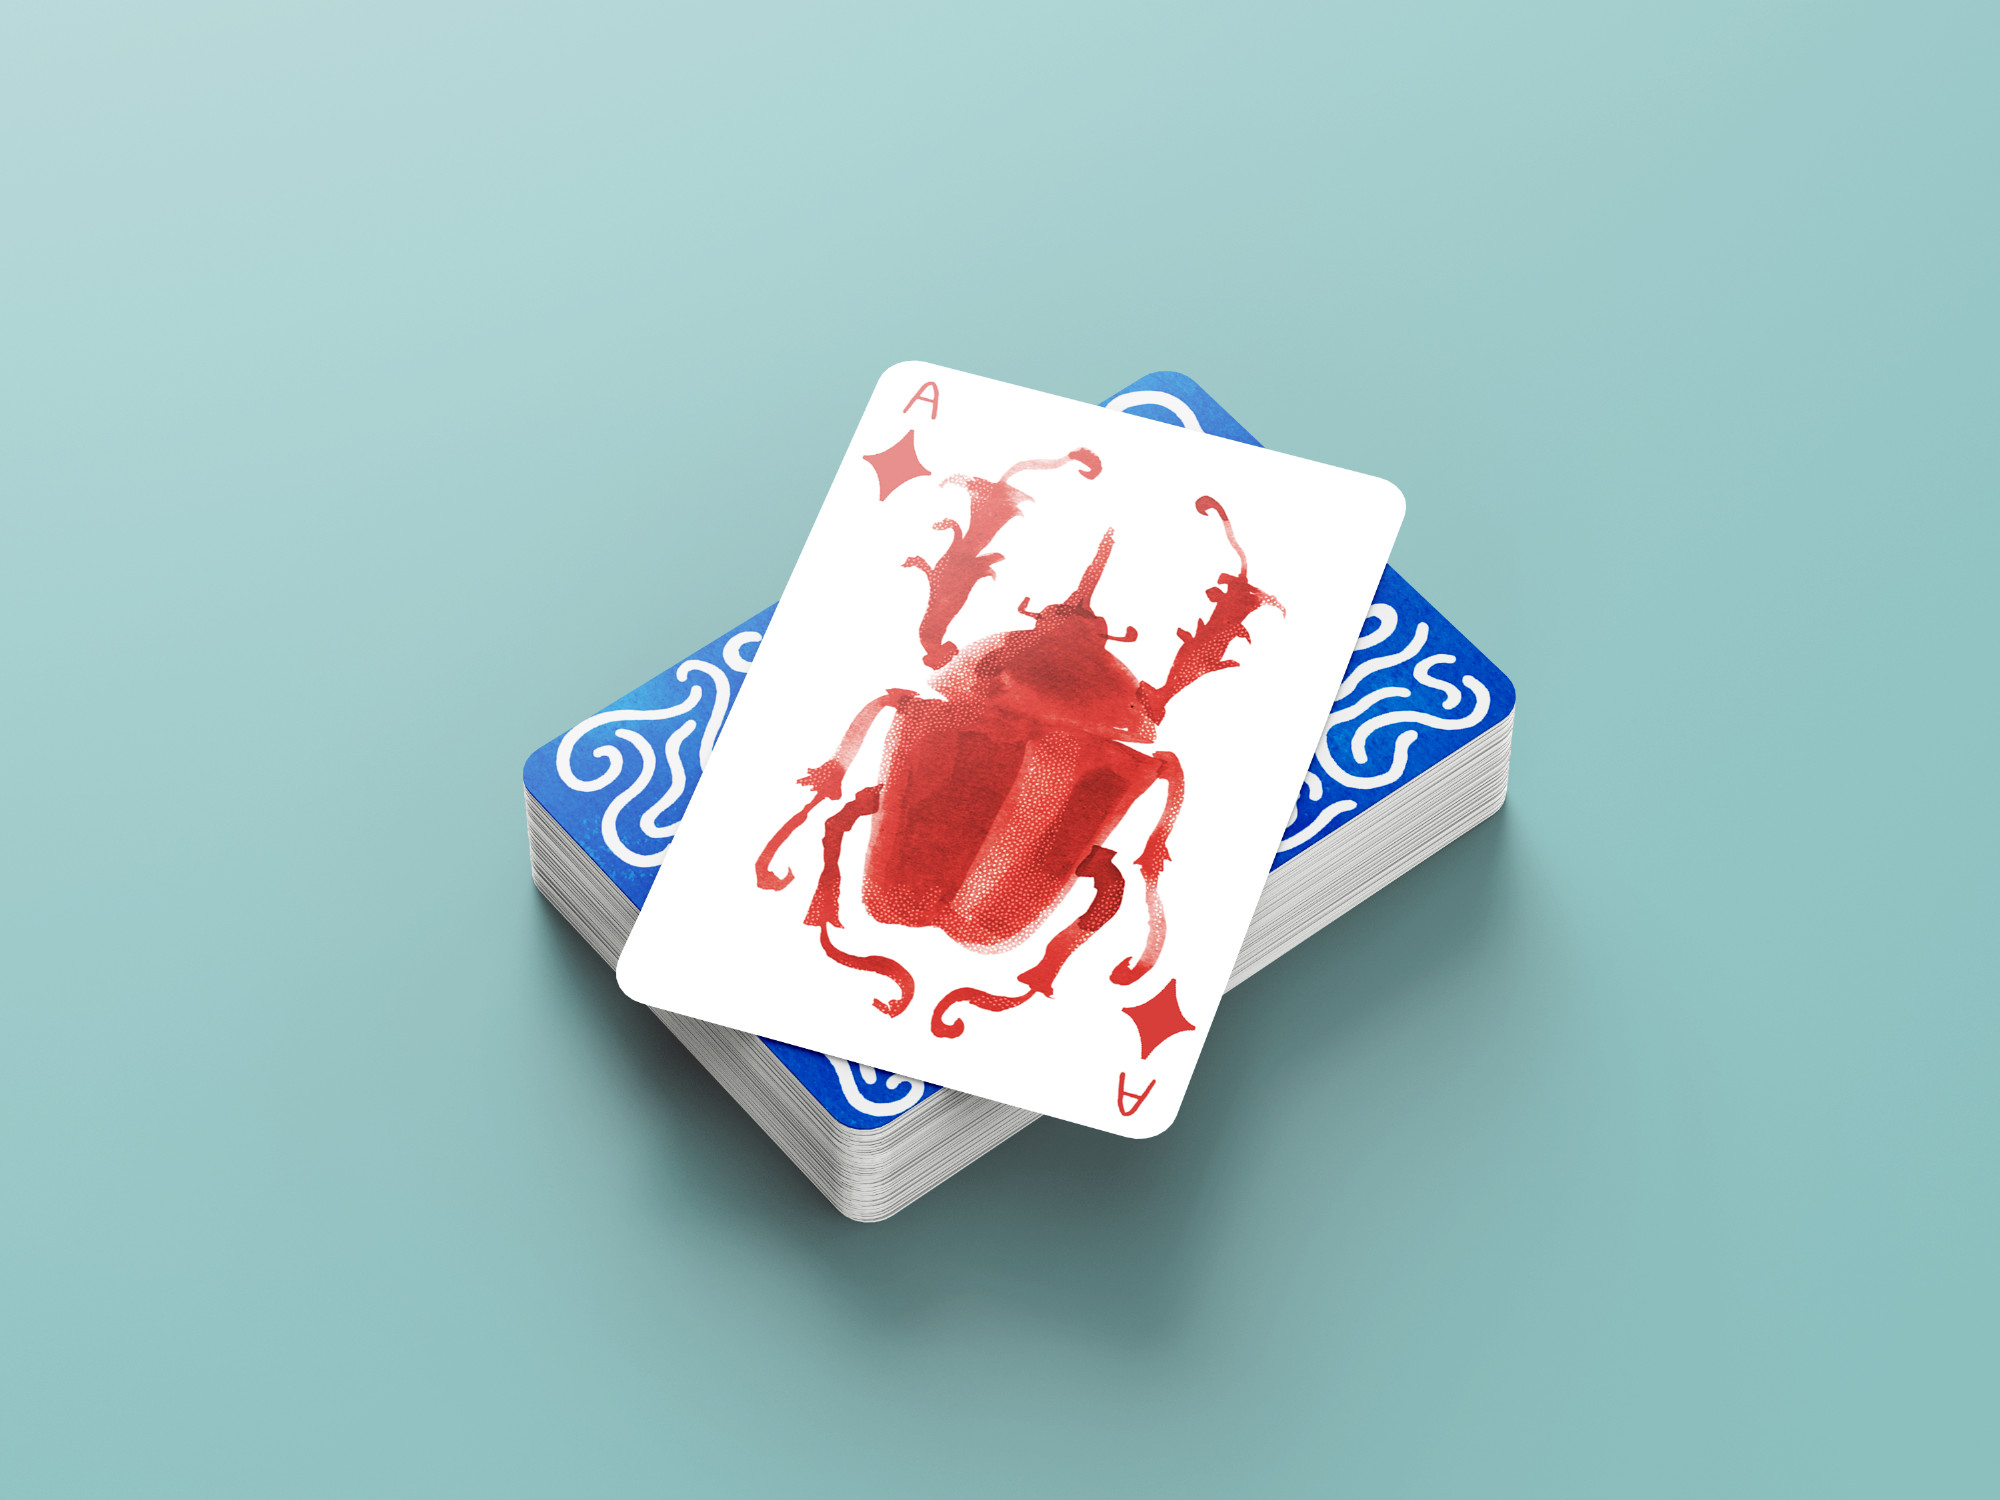 Beetle Playing Card on stack.